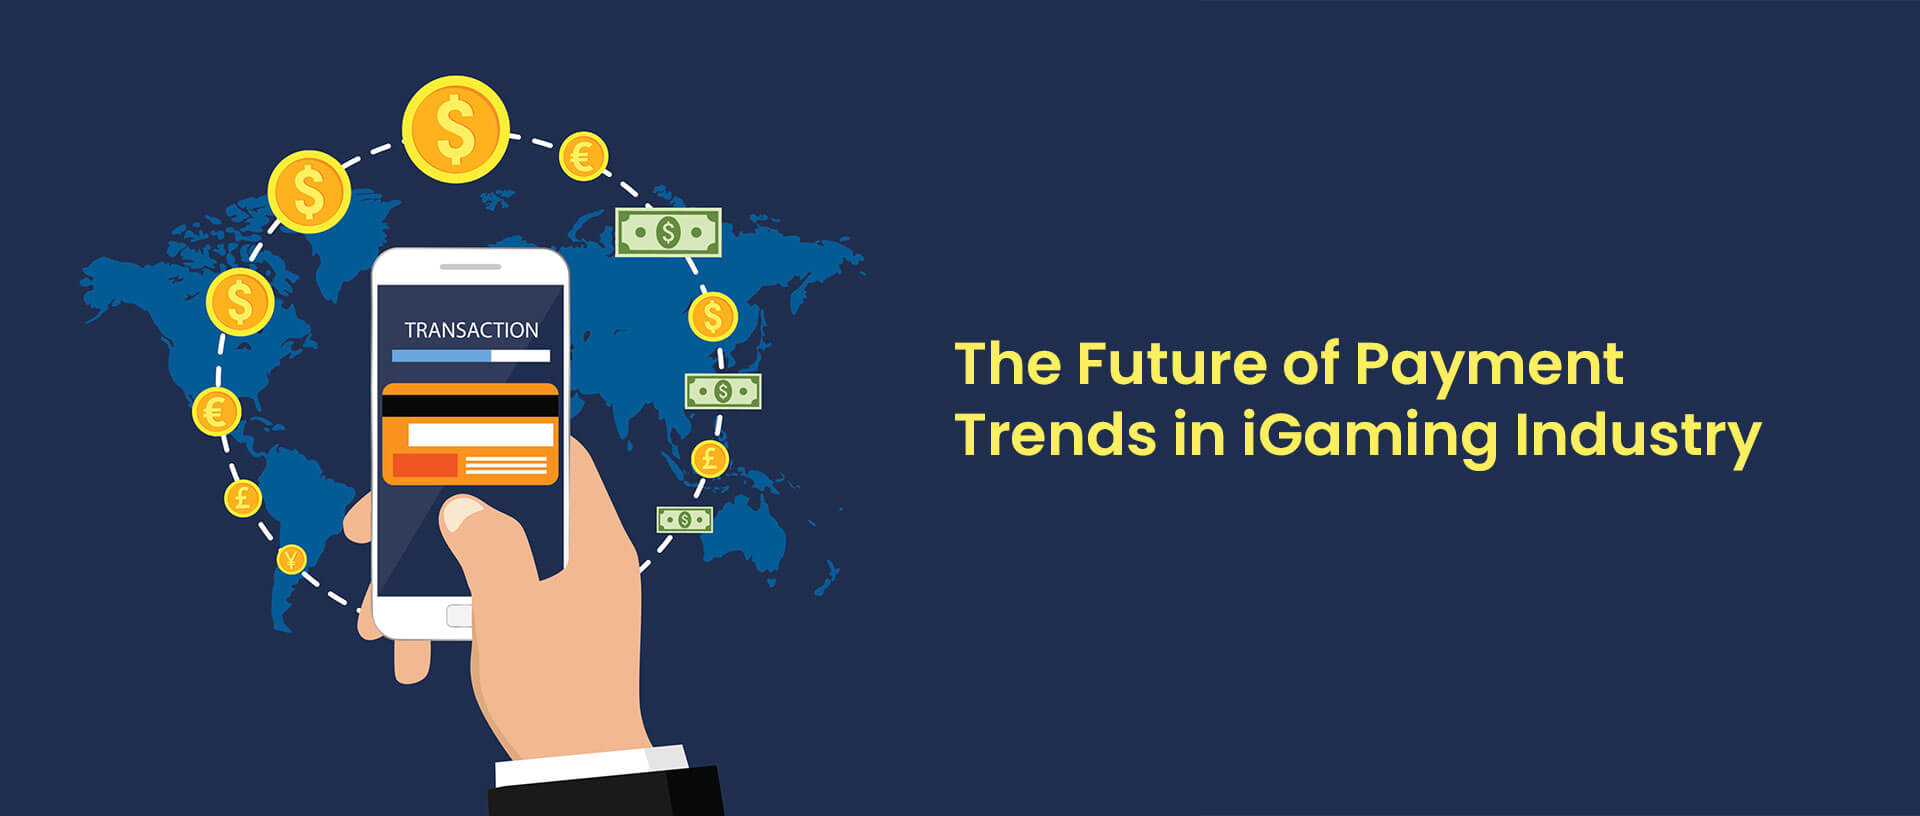 The Future of Payment Trends in iGaming Industry - Image 1